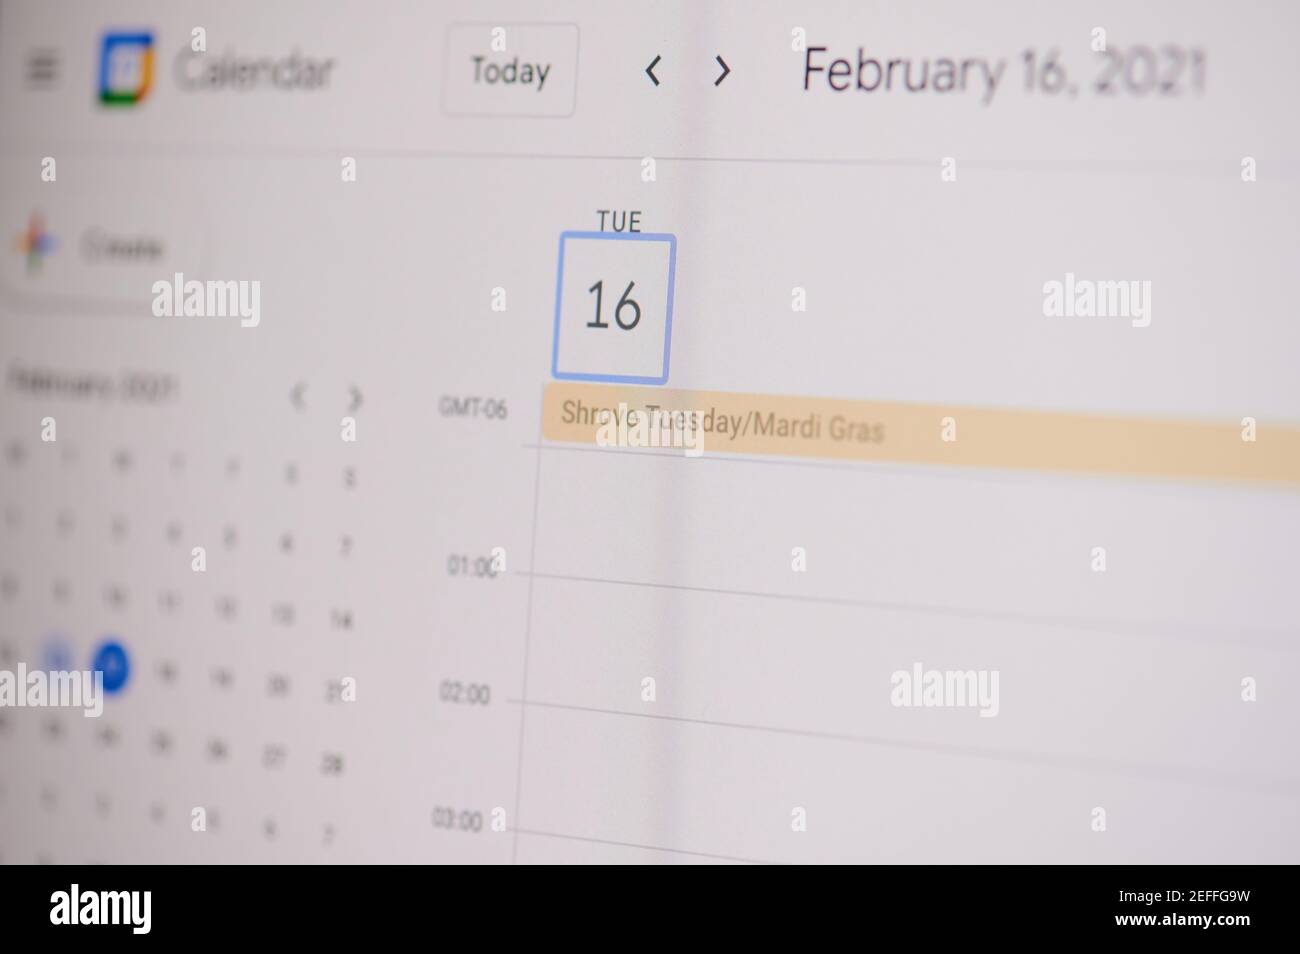 New york, USA - February 17, 2021: Shrove Tuesday 16 of April on google calendar on laptop screen close up view. Stock Photo